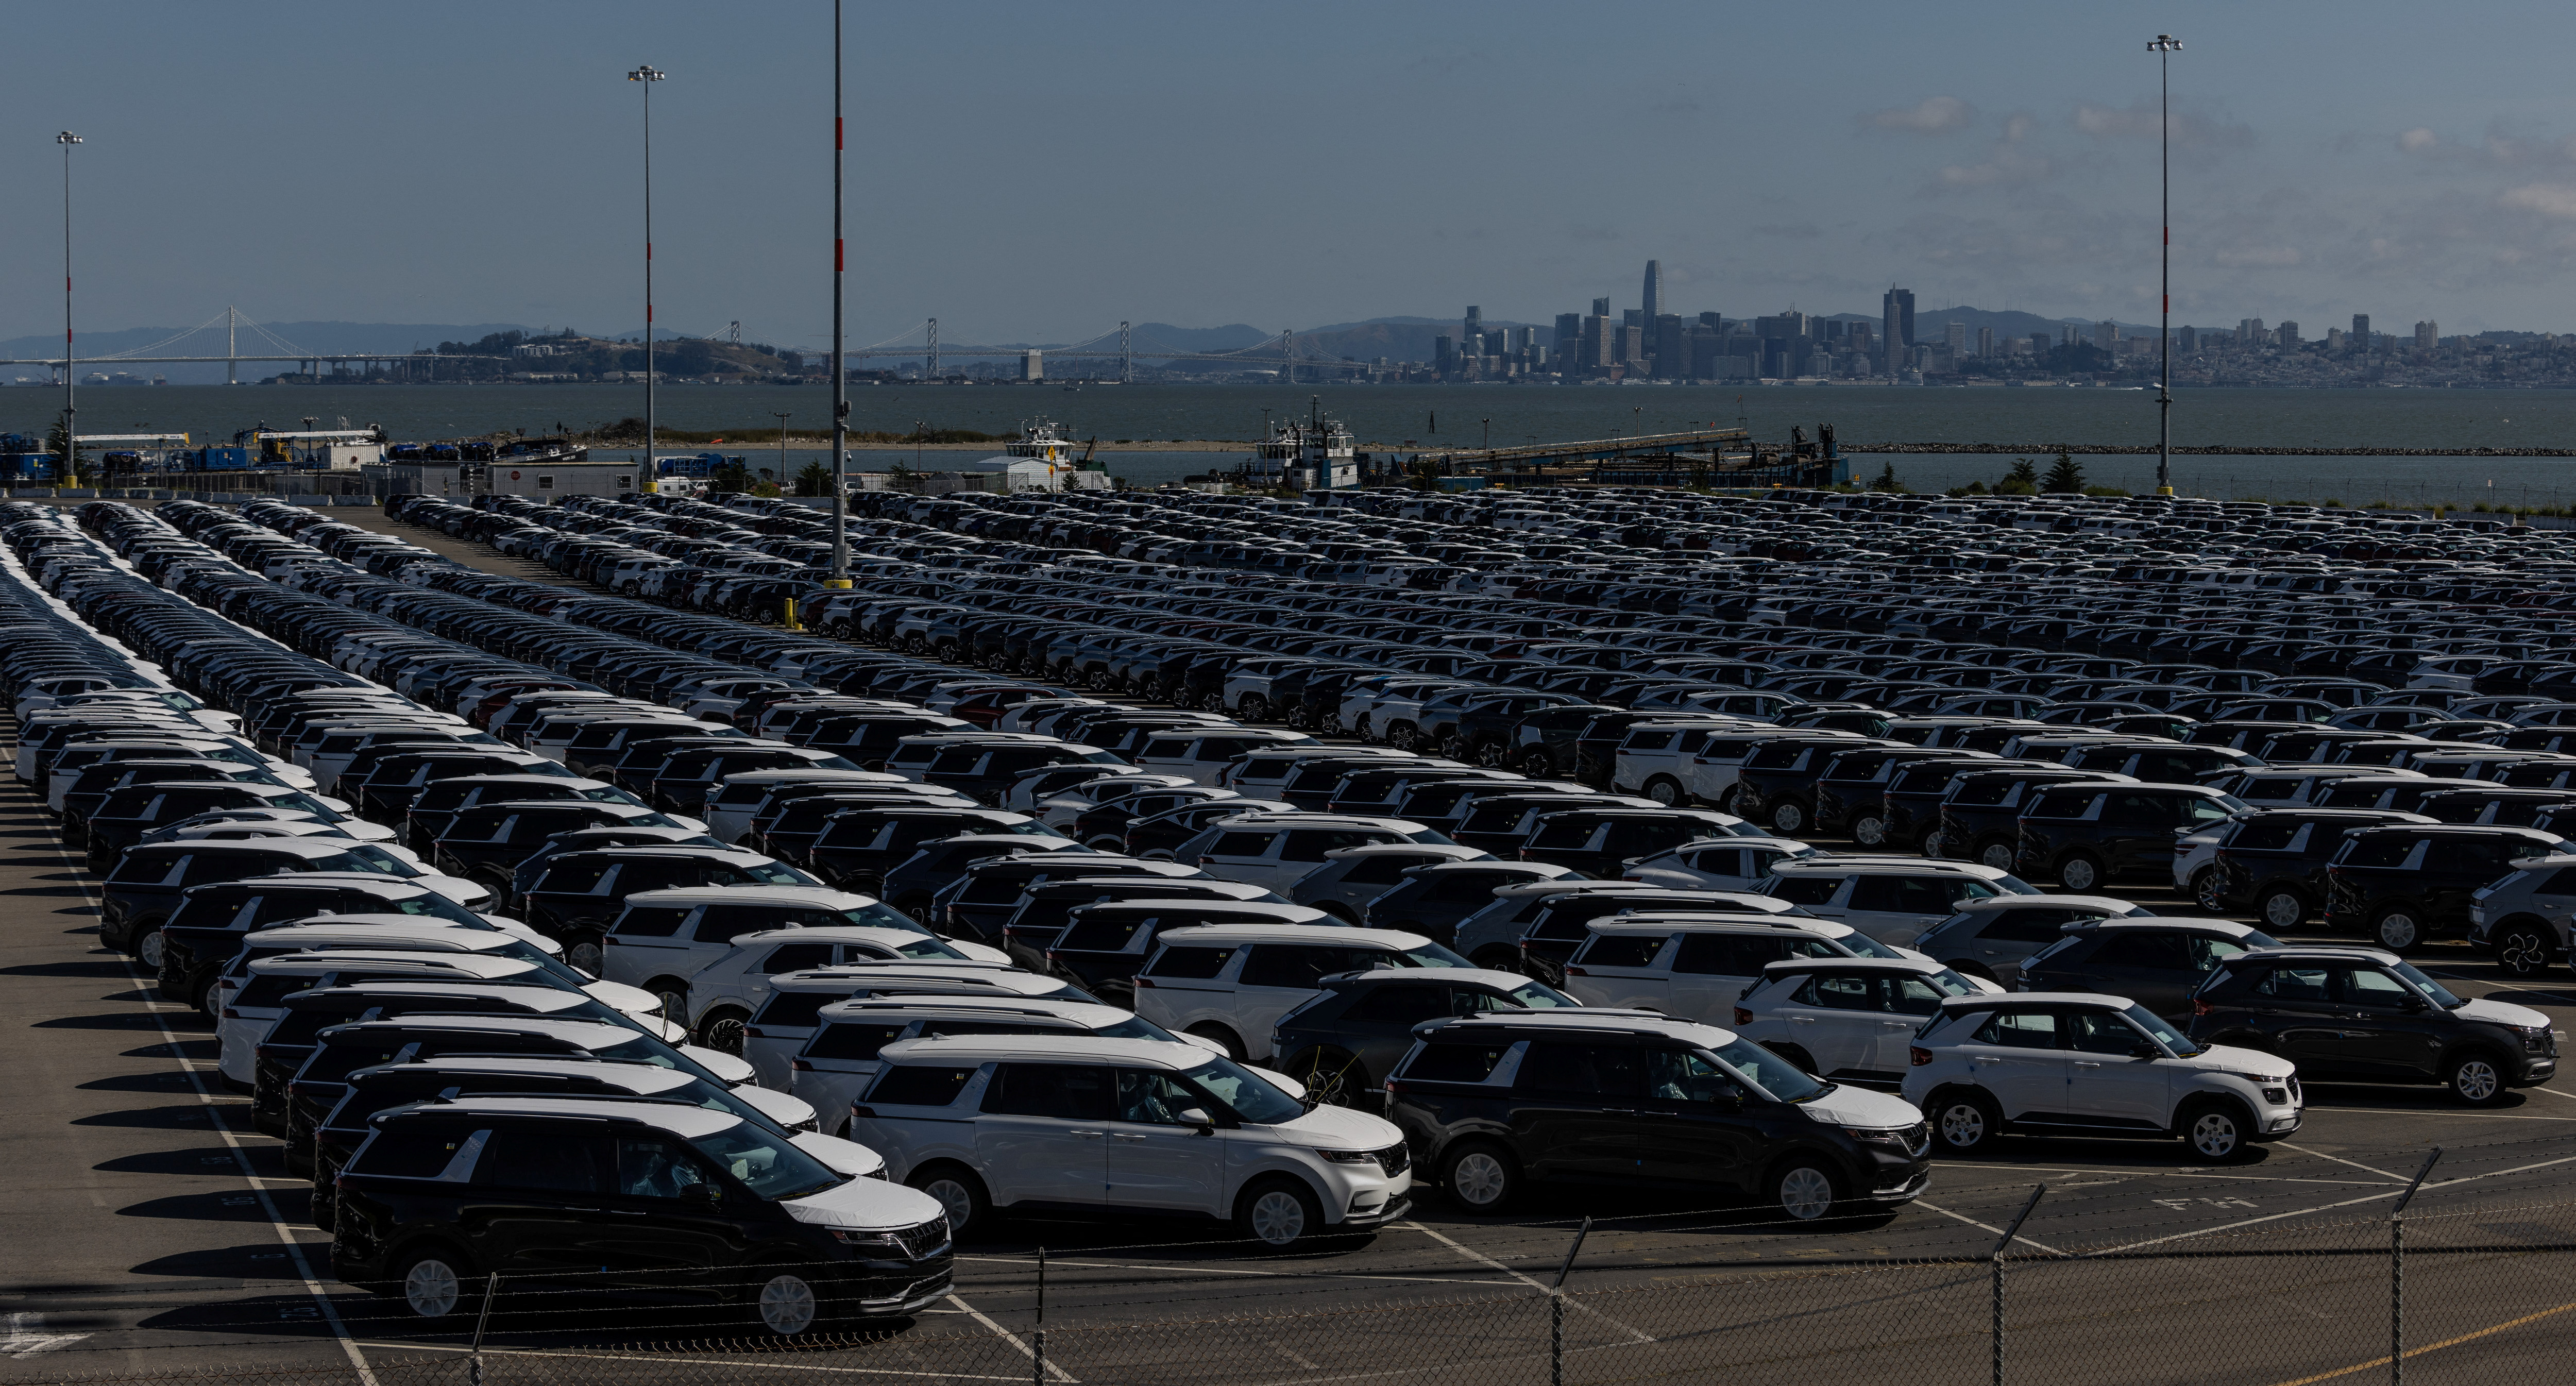 New vehicles are seen at a parking lot in the Port of Richmond, California